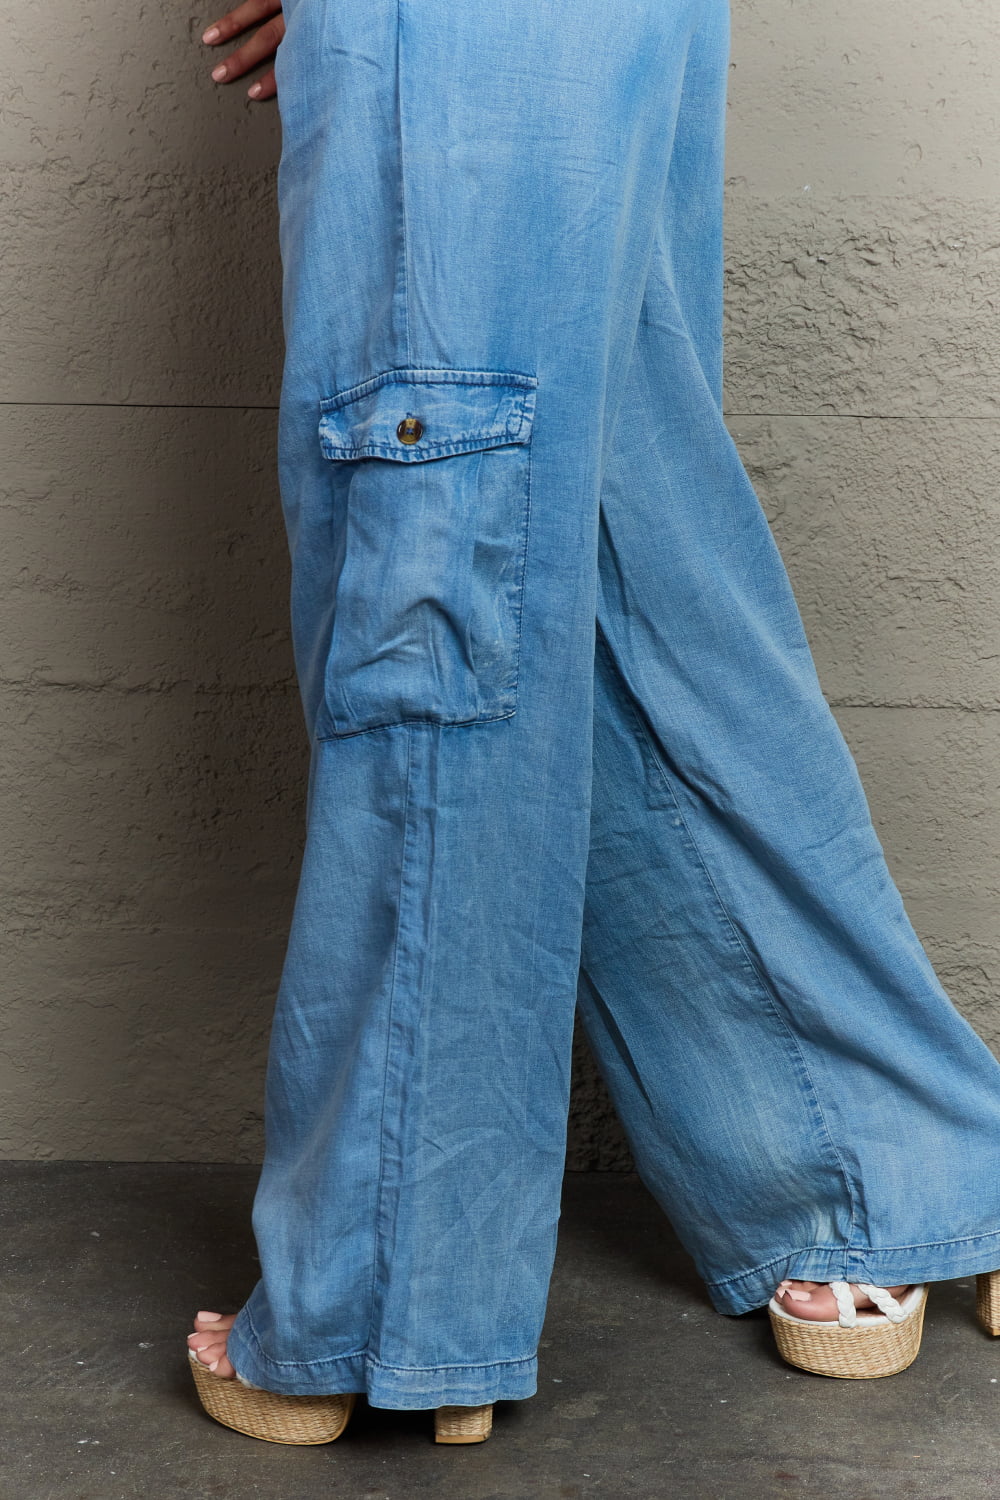 Dim Gray GeeGee Out Of Site Full Size Denim Cargo Pants Sentient Beauty Fashions Apparel & Accessories